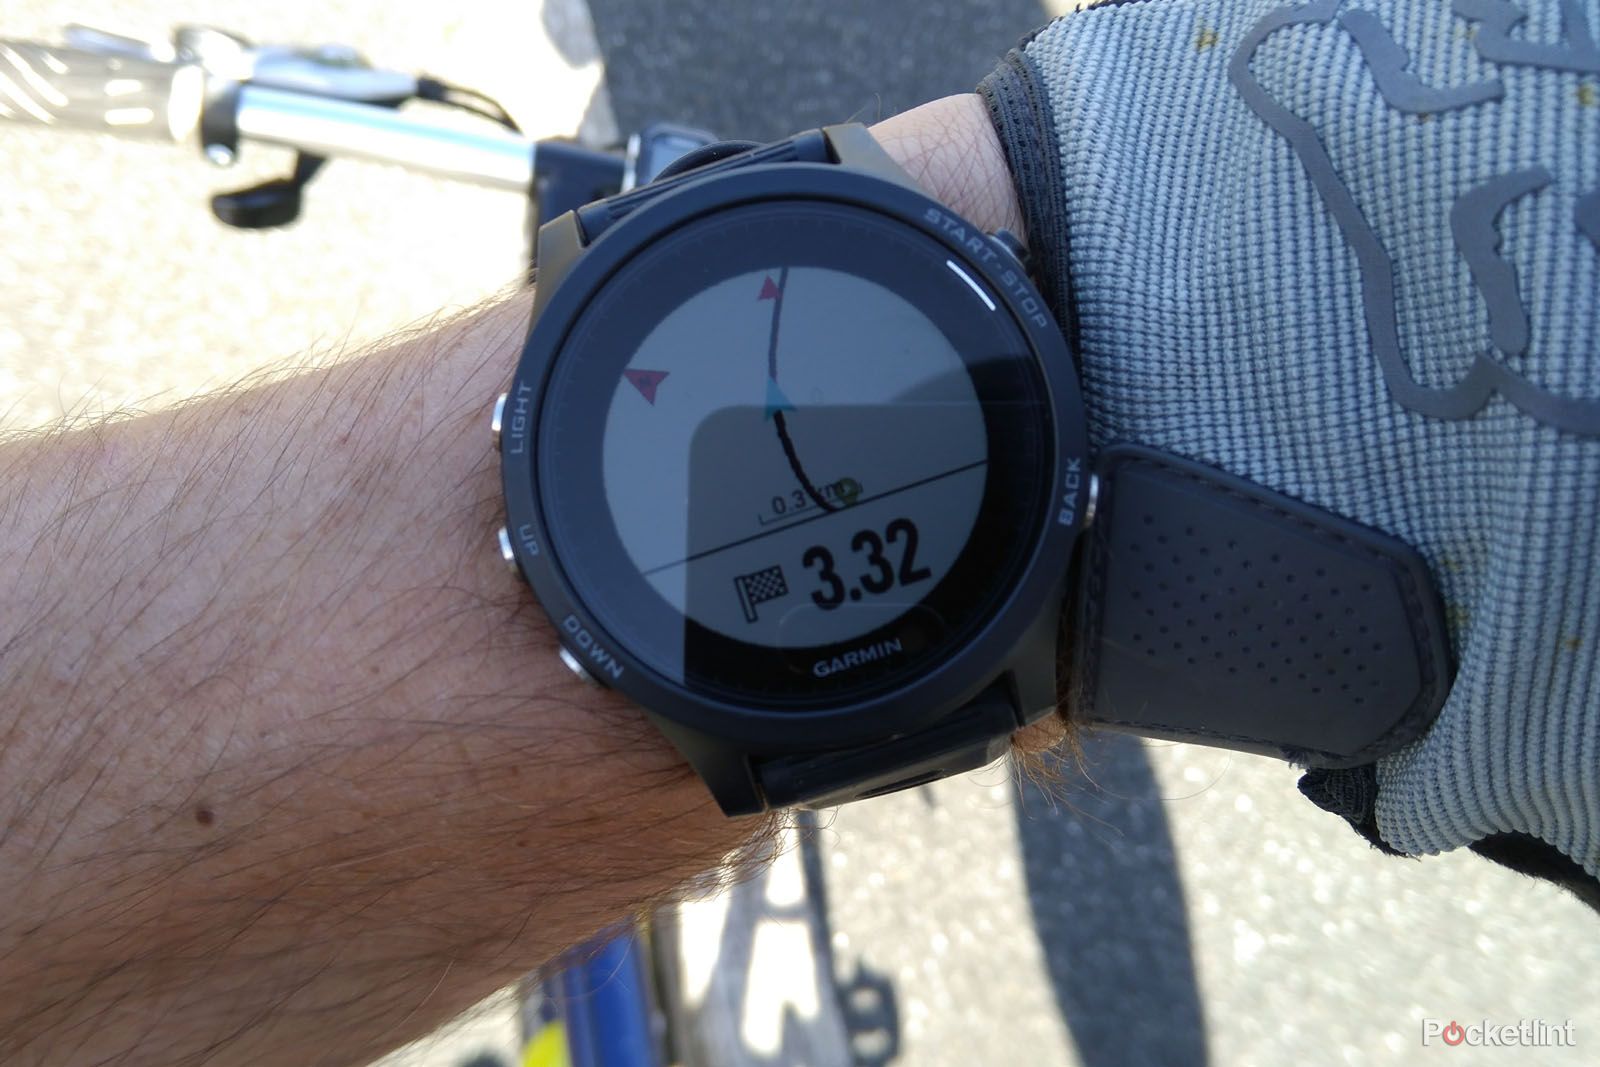 Garmin Forerunner 935 Review: Big on Fitness Features, Not Size